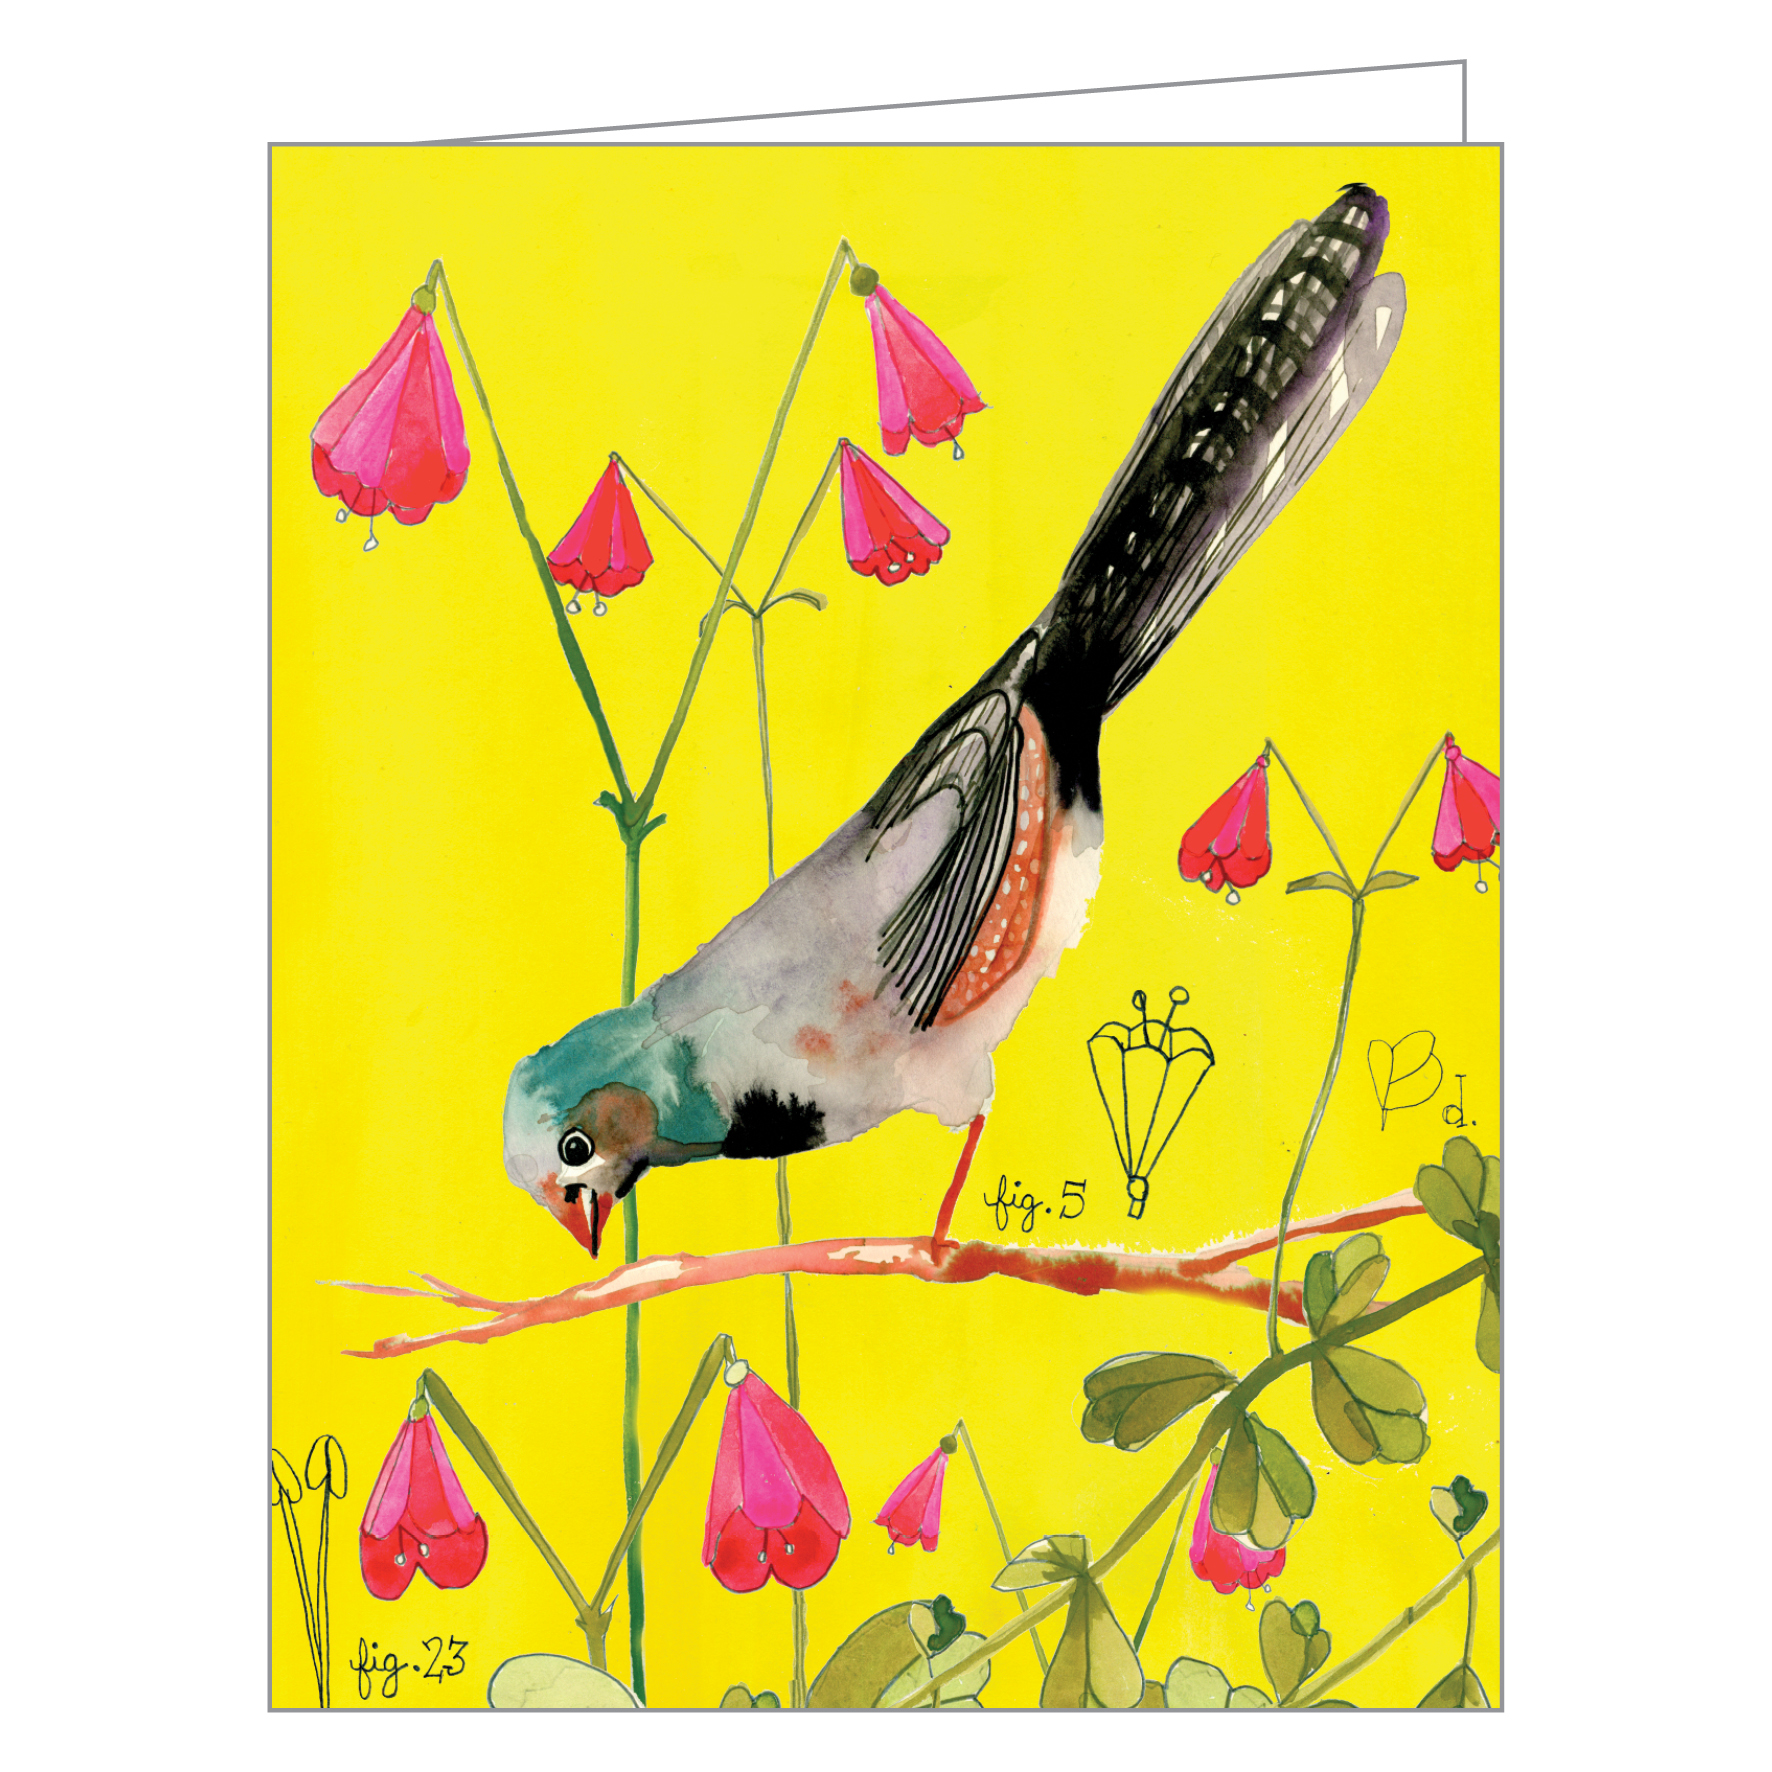 Anisa Makhoul's watercolour illustration of small bird, on notecard box, by teNeues stationers.